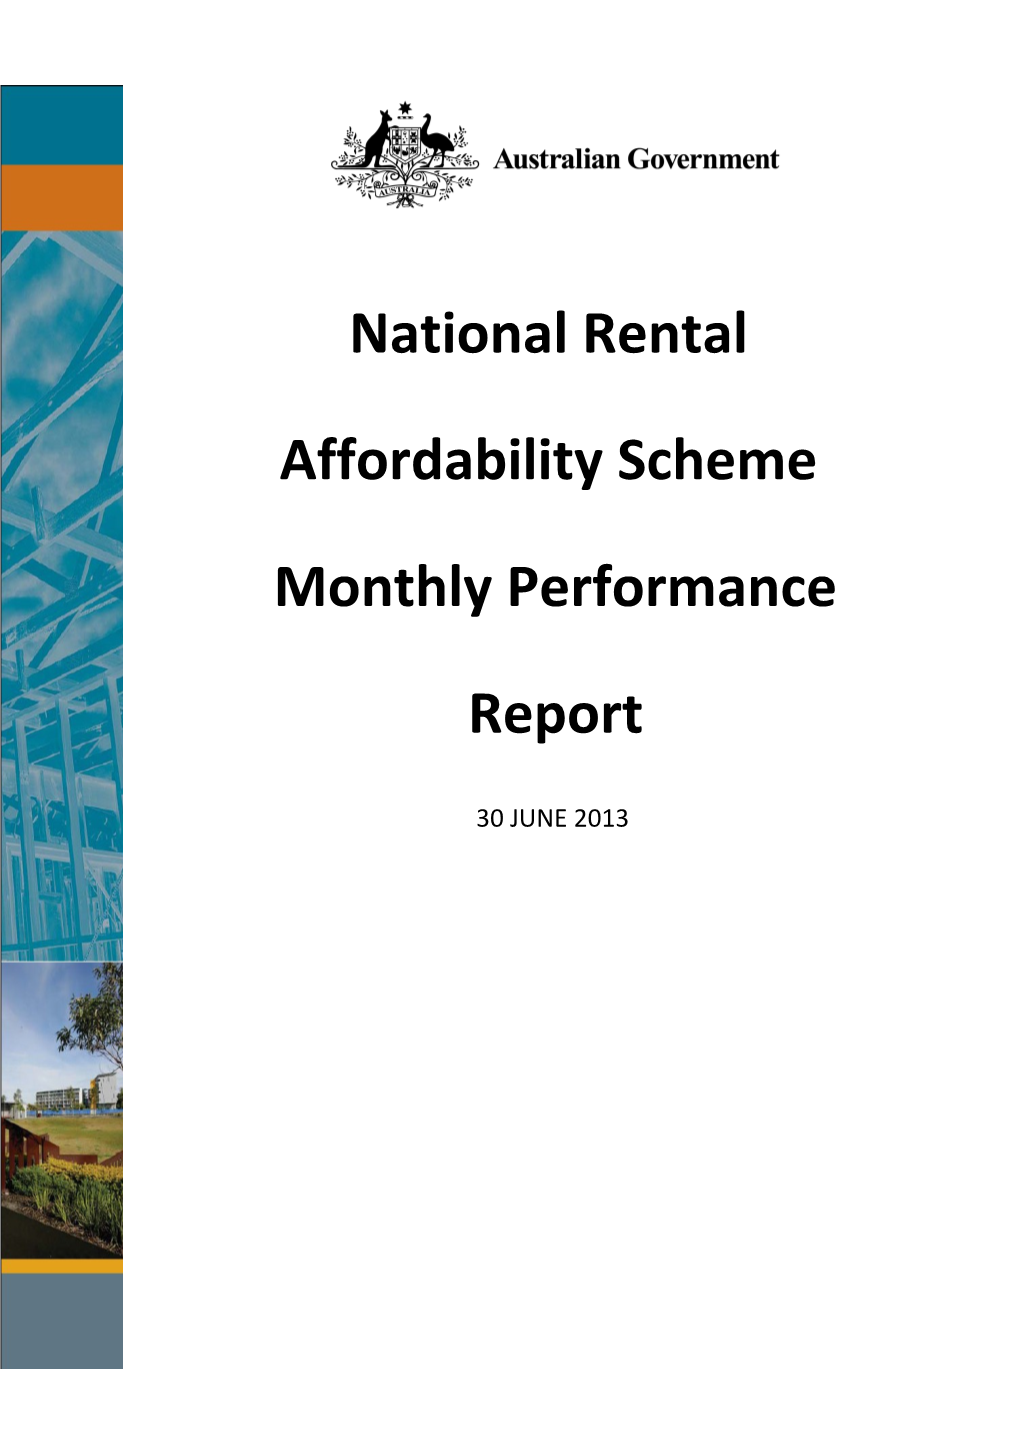 NRAS Monthly Performance Report - June 2013